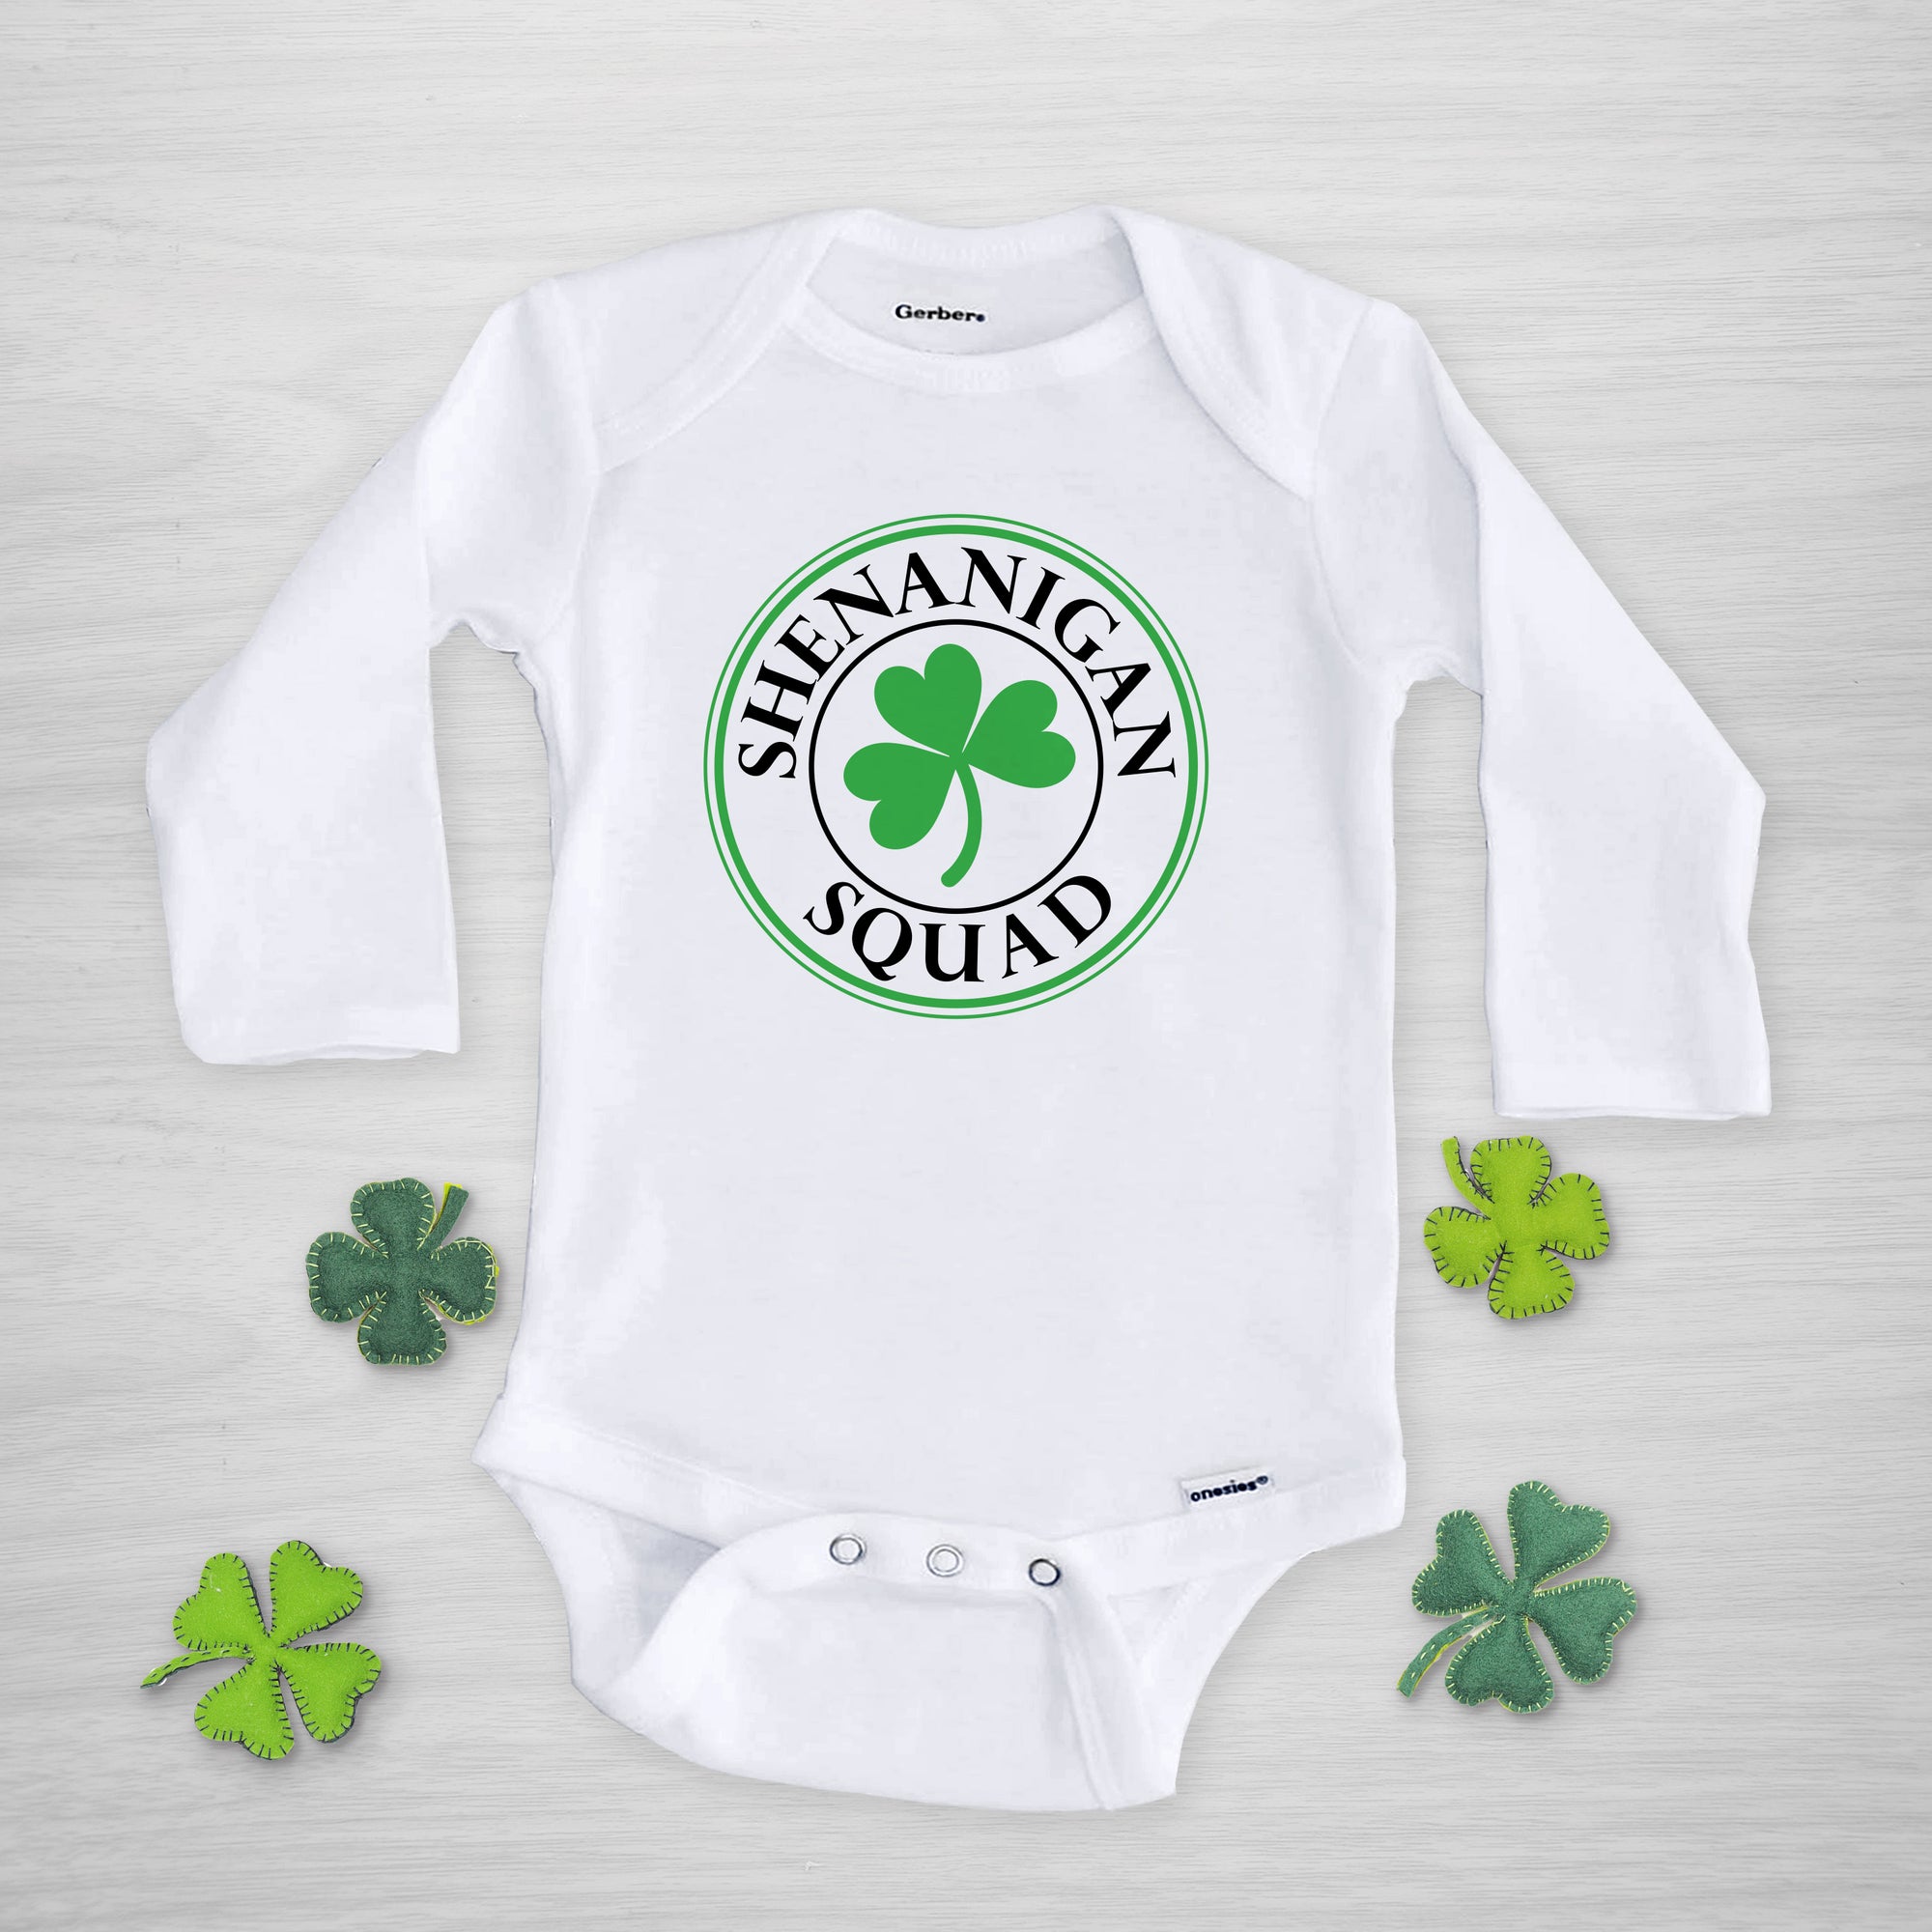 Shenanigan Squad Gerber Onesie® with shamrock, long sleeved, for St. Patrick's Day